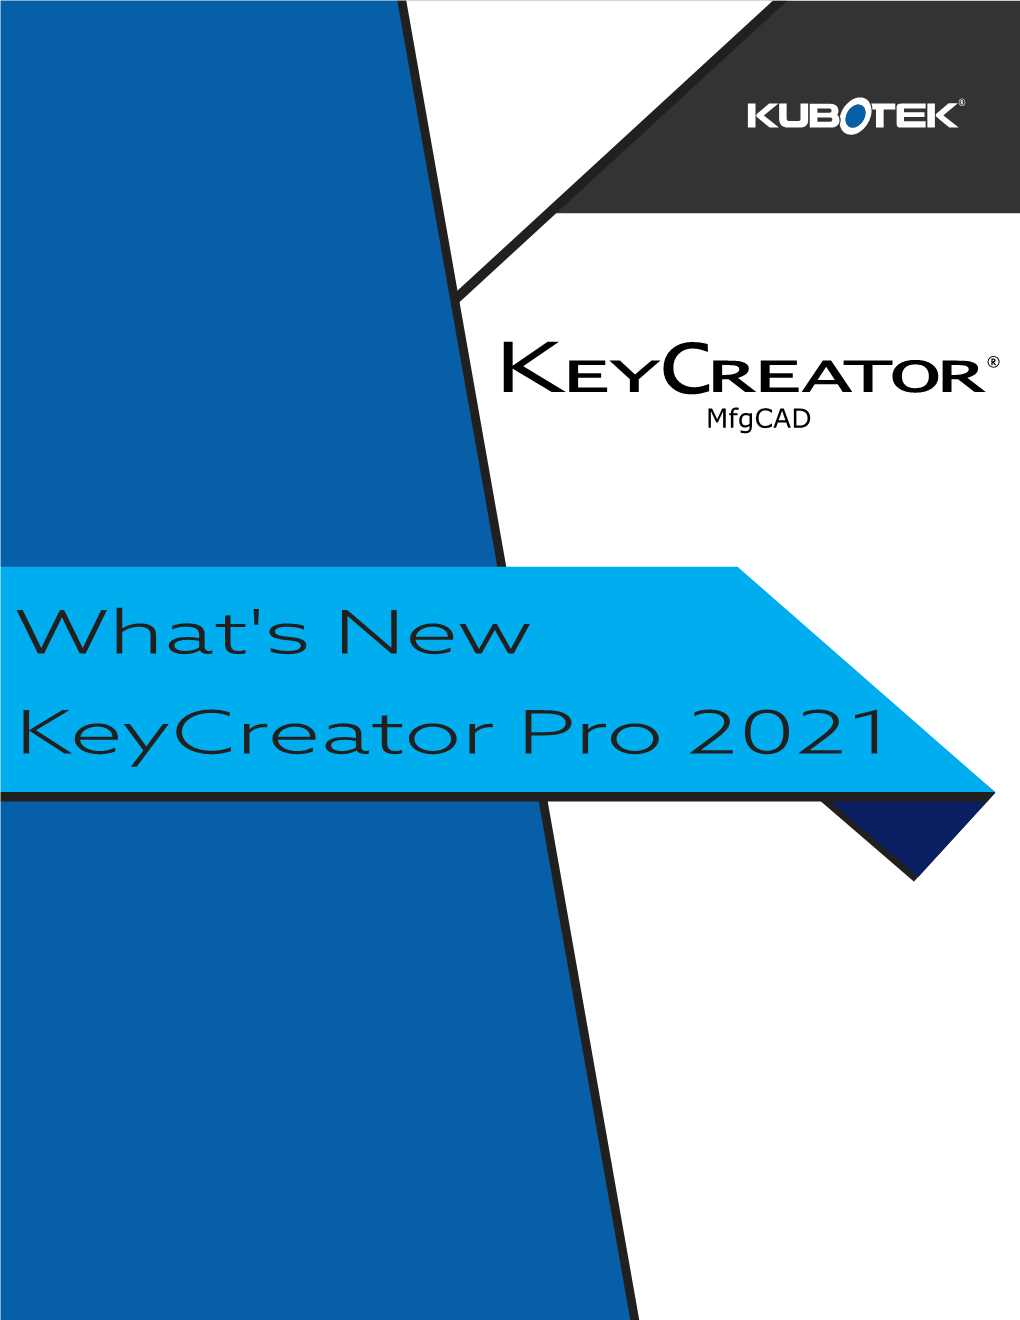 What's New Keycreator Pro 2021